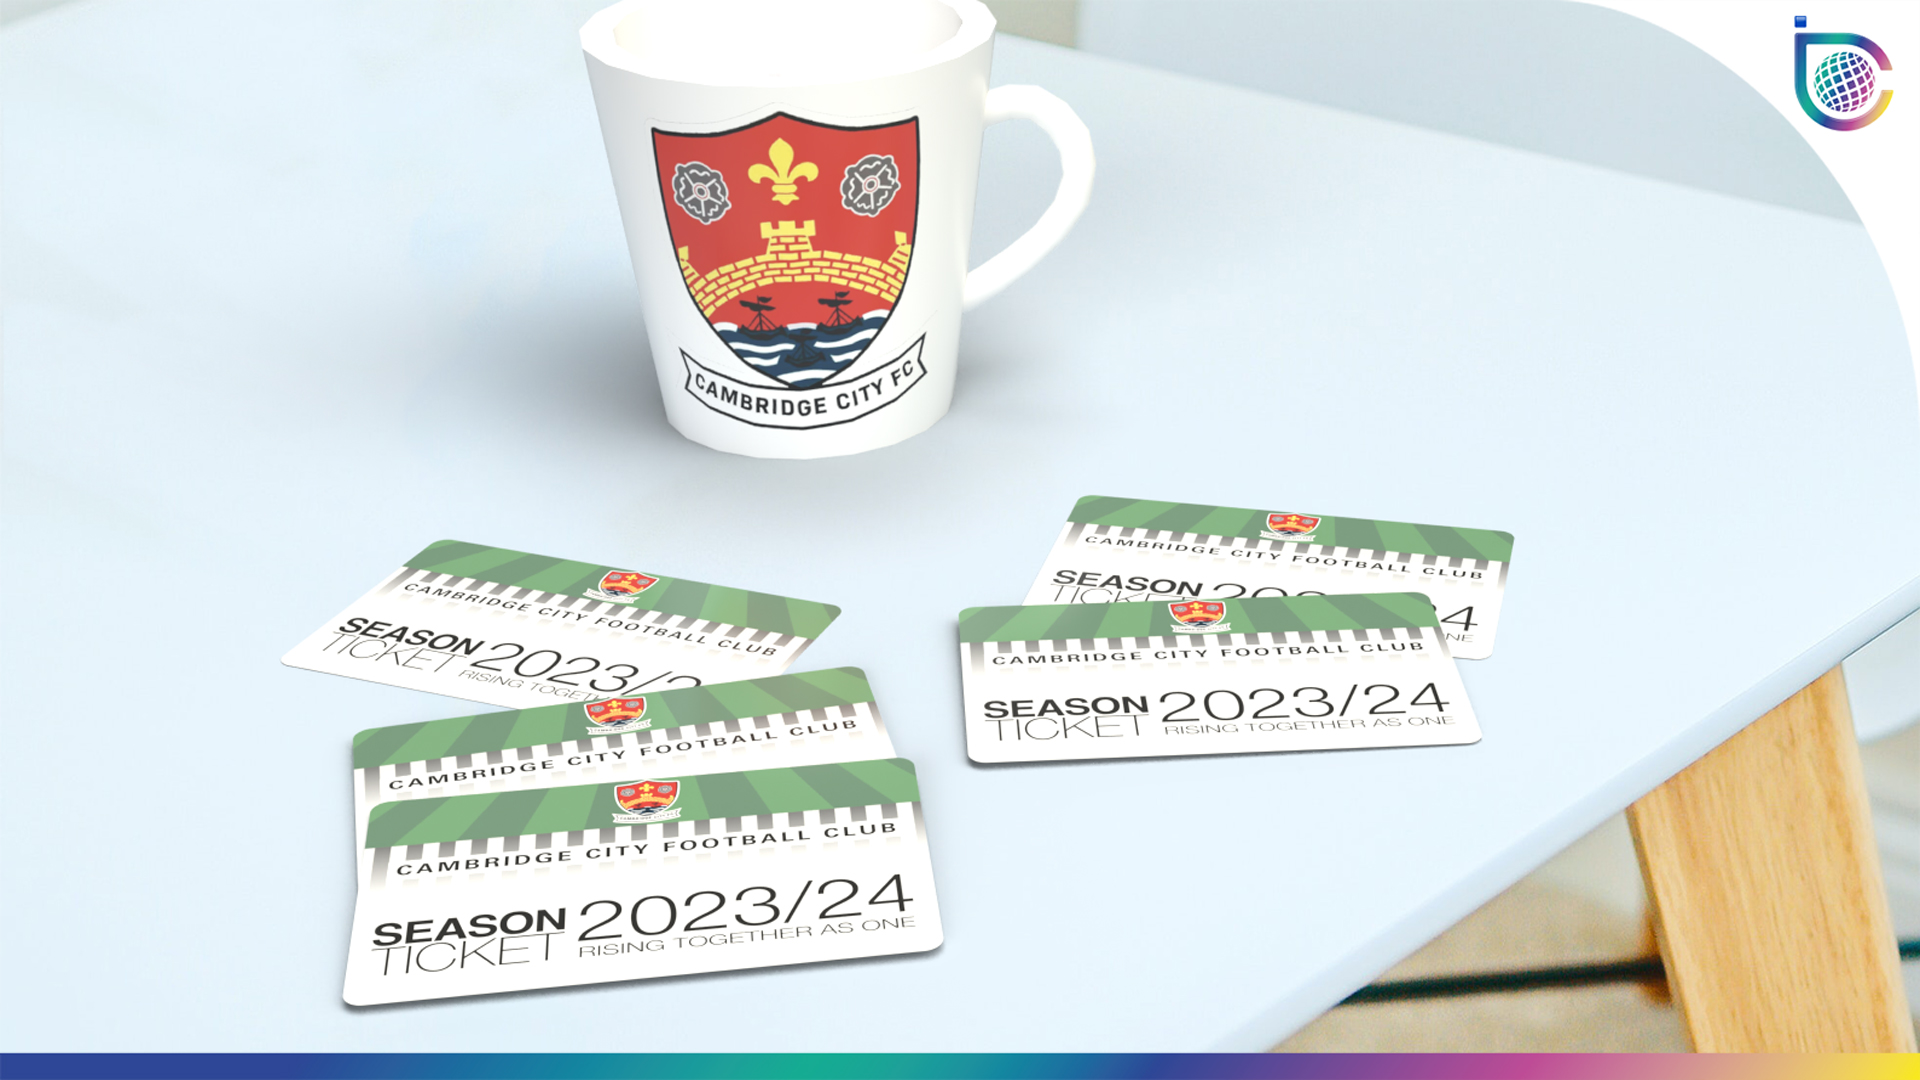 Incodia Sponsor Cambridge City Football Club by designing and producing their new 2023/24 Season tickets